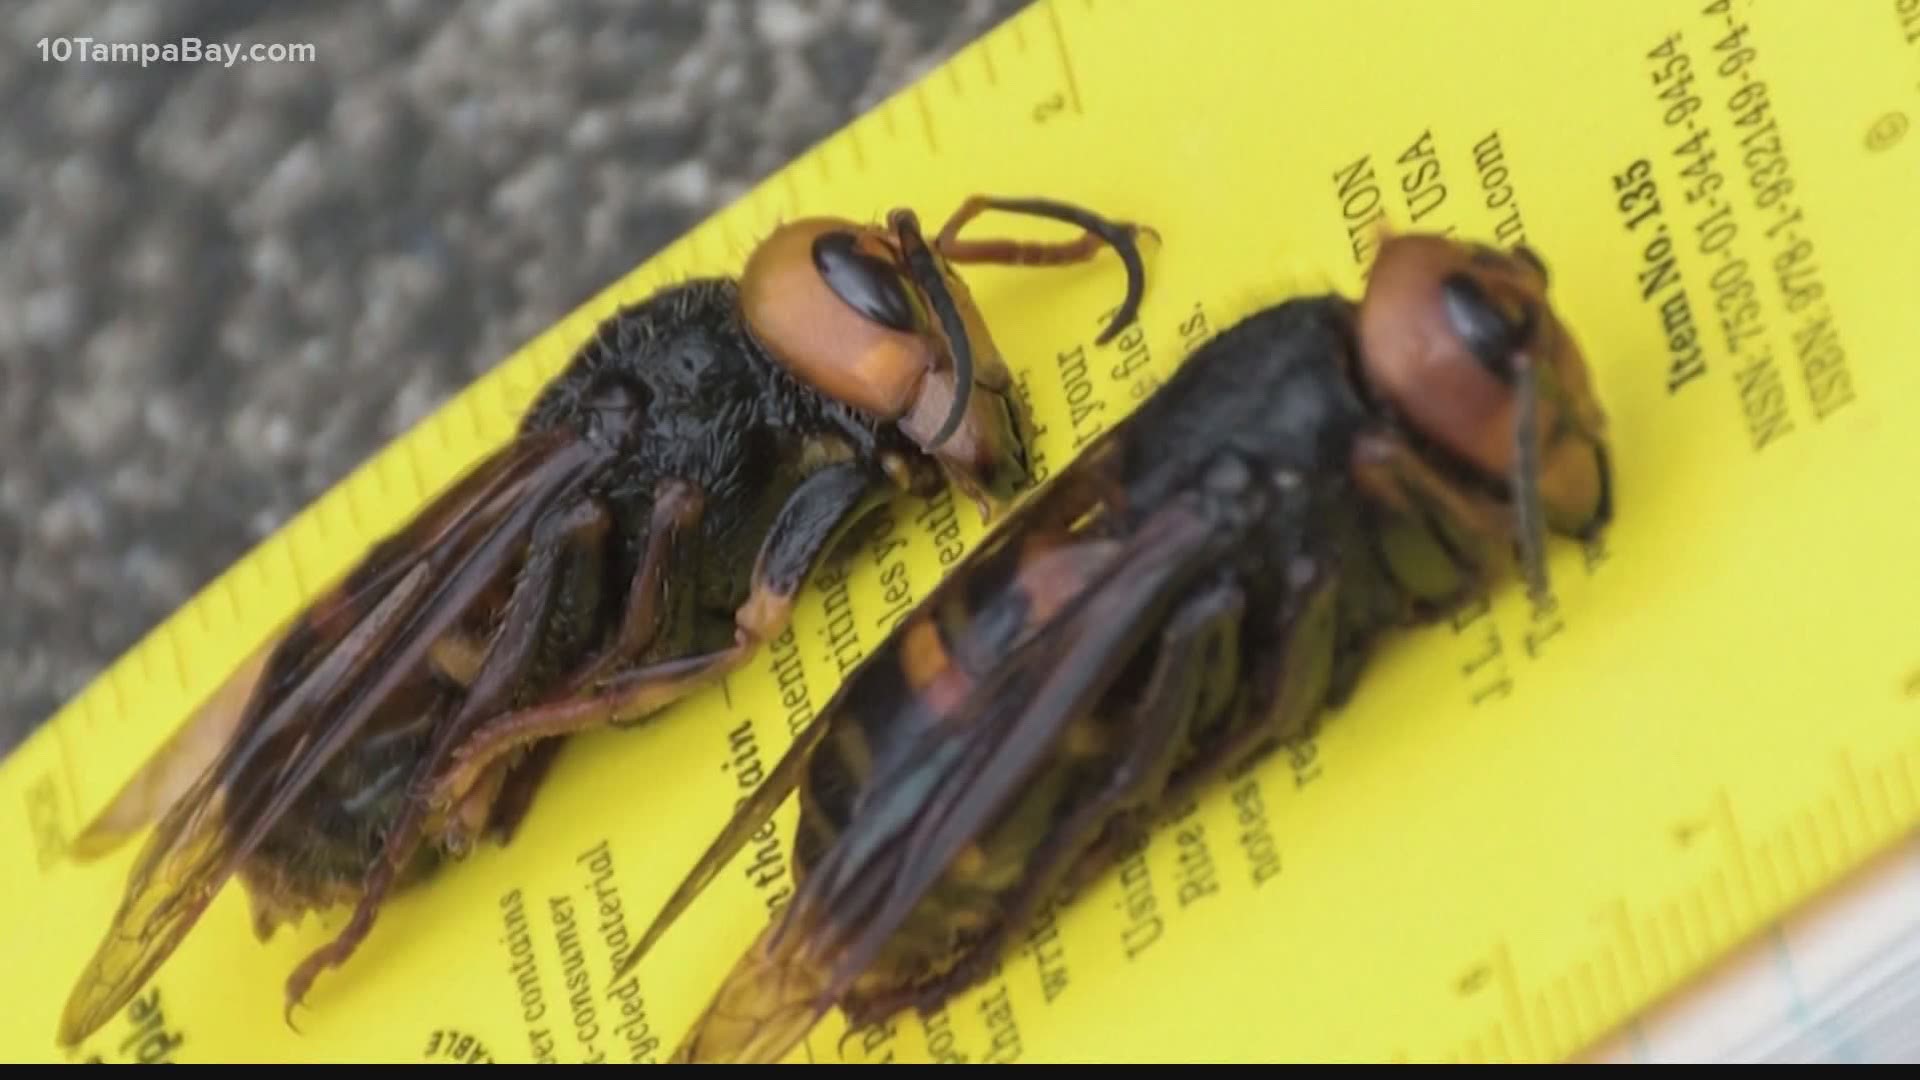 This was the first Asian giant hornet found in a trap, rather than found in the environment as the state’s five previous confirmed sightings were.